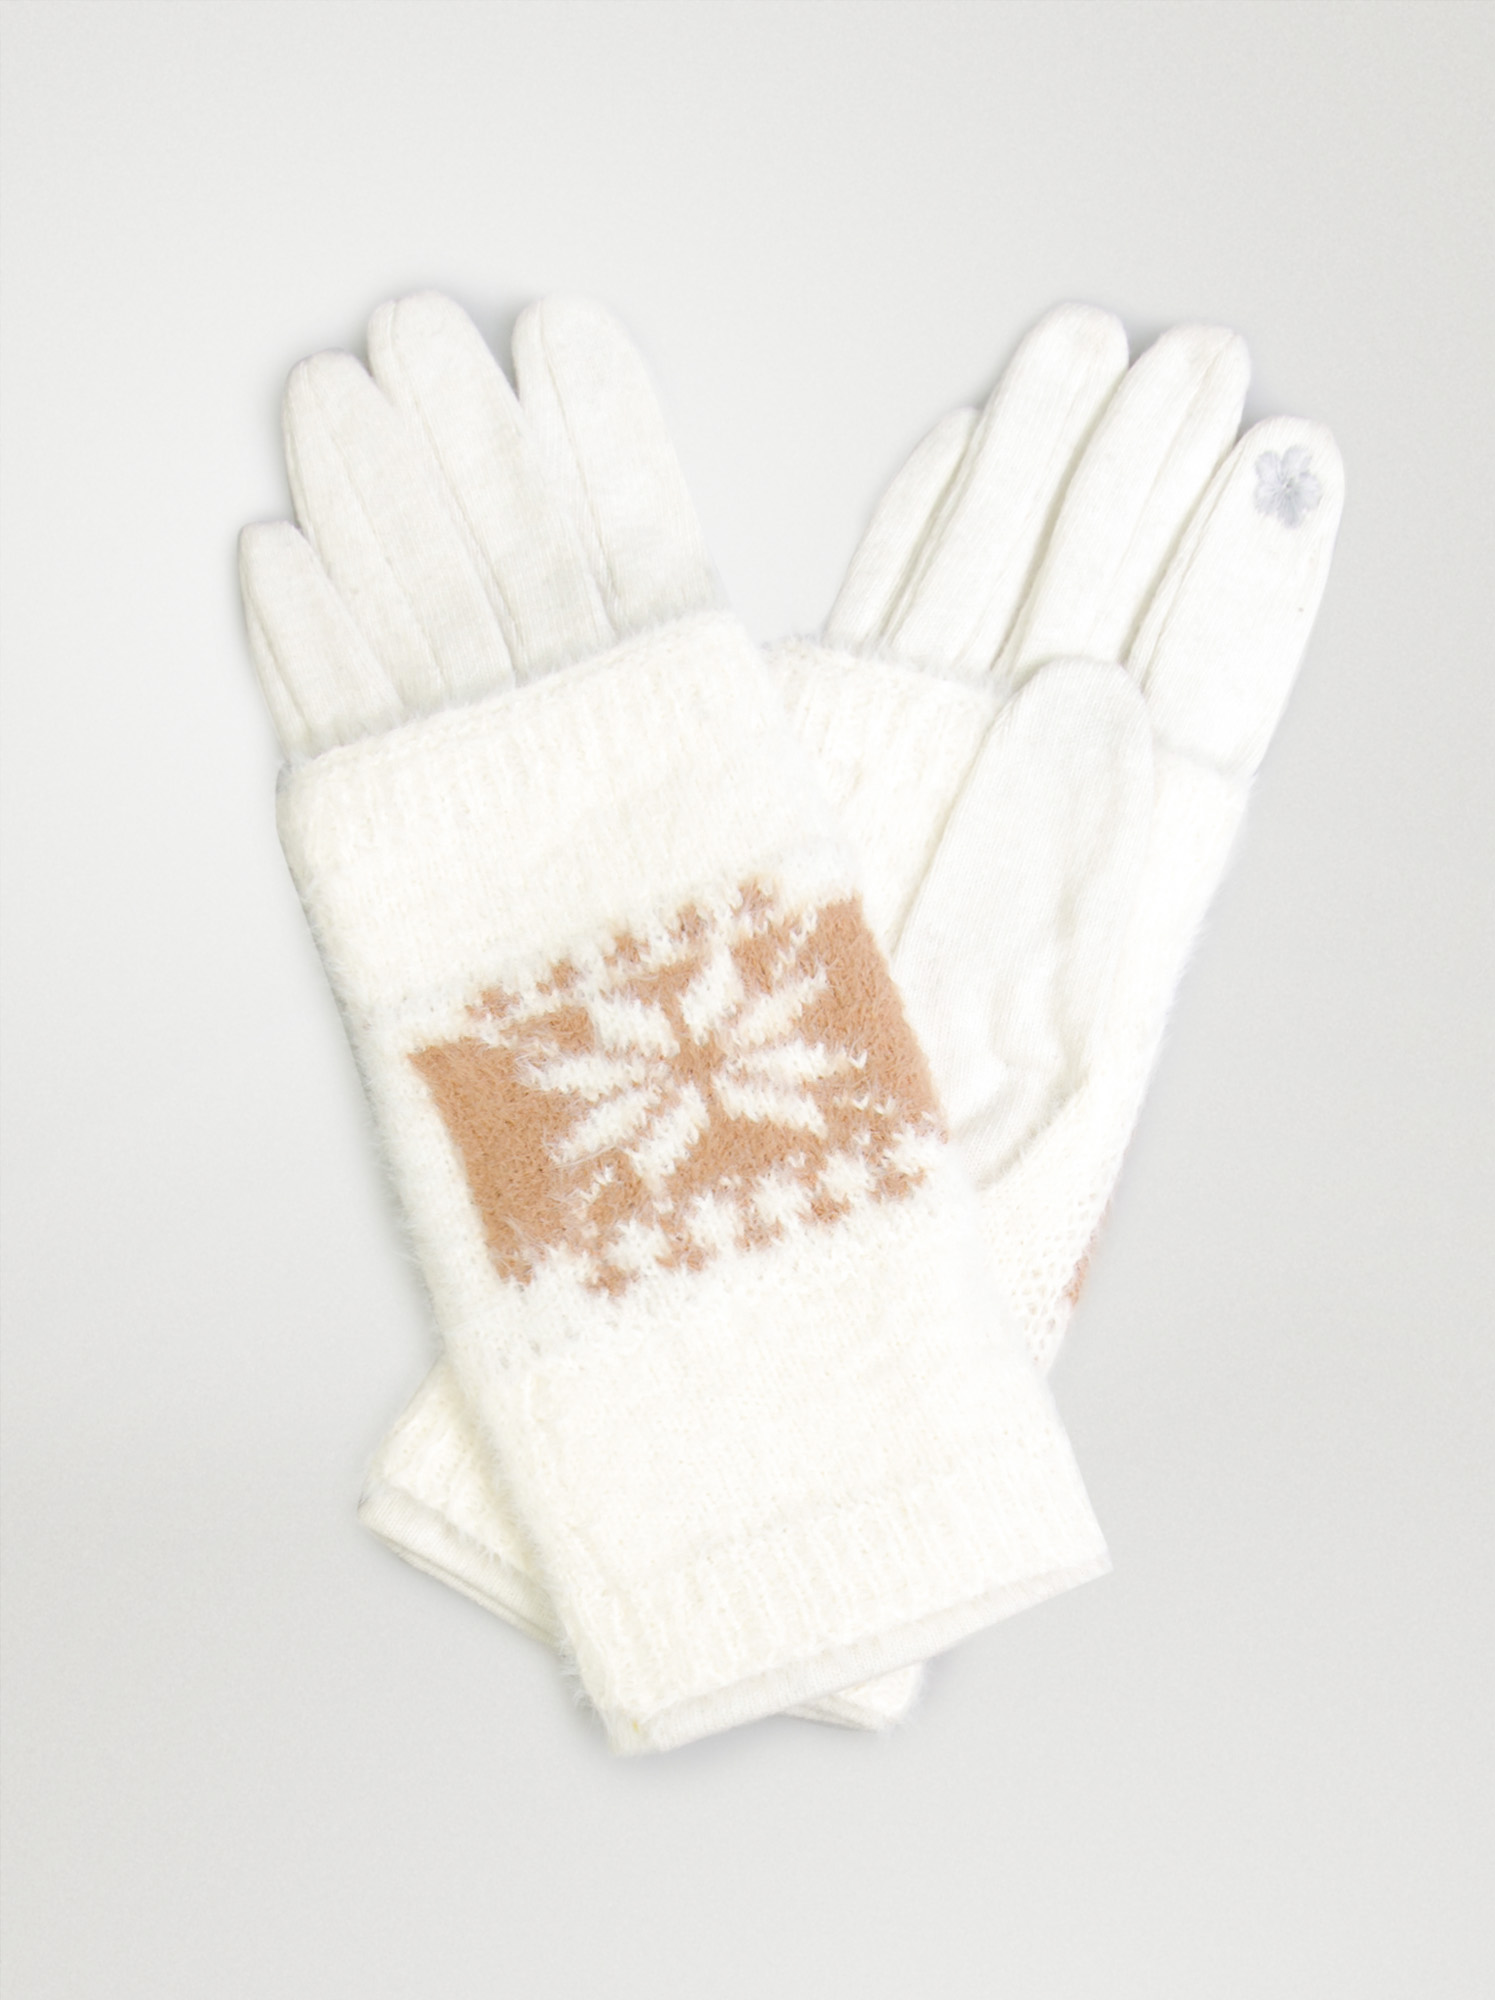 Two-piece gloves - Allora image 1